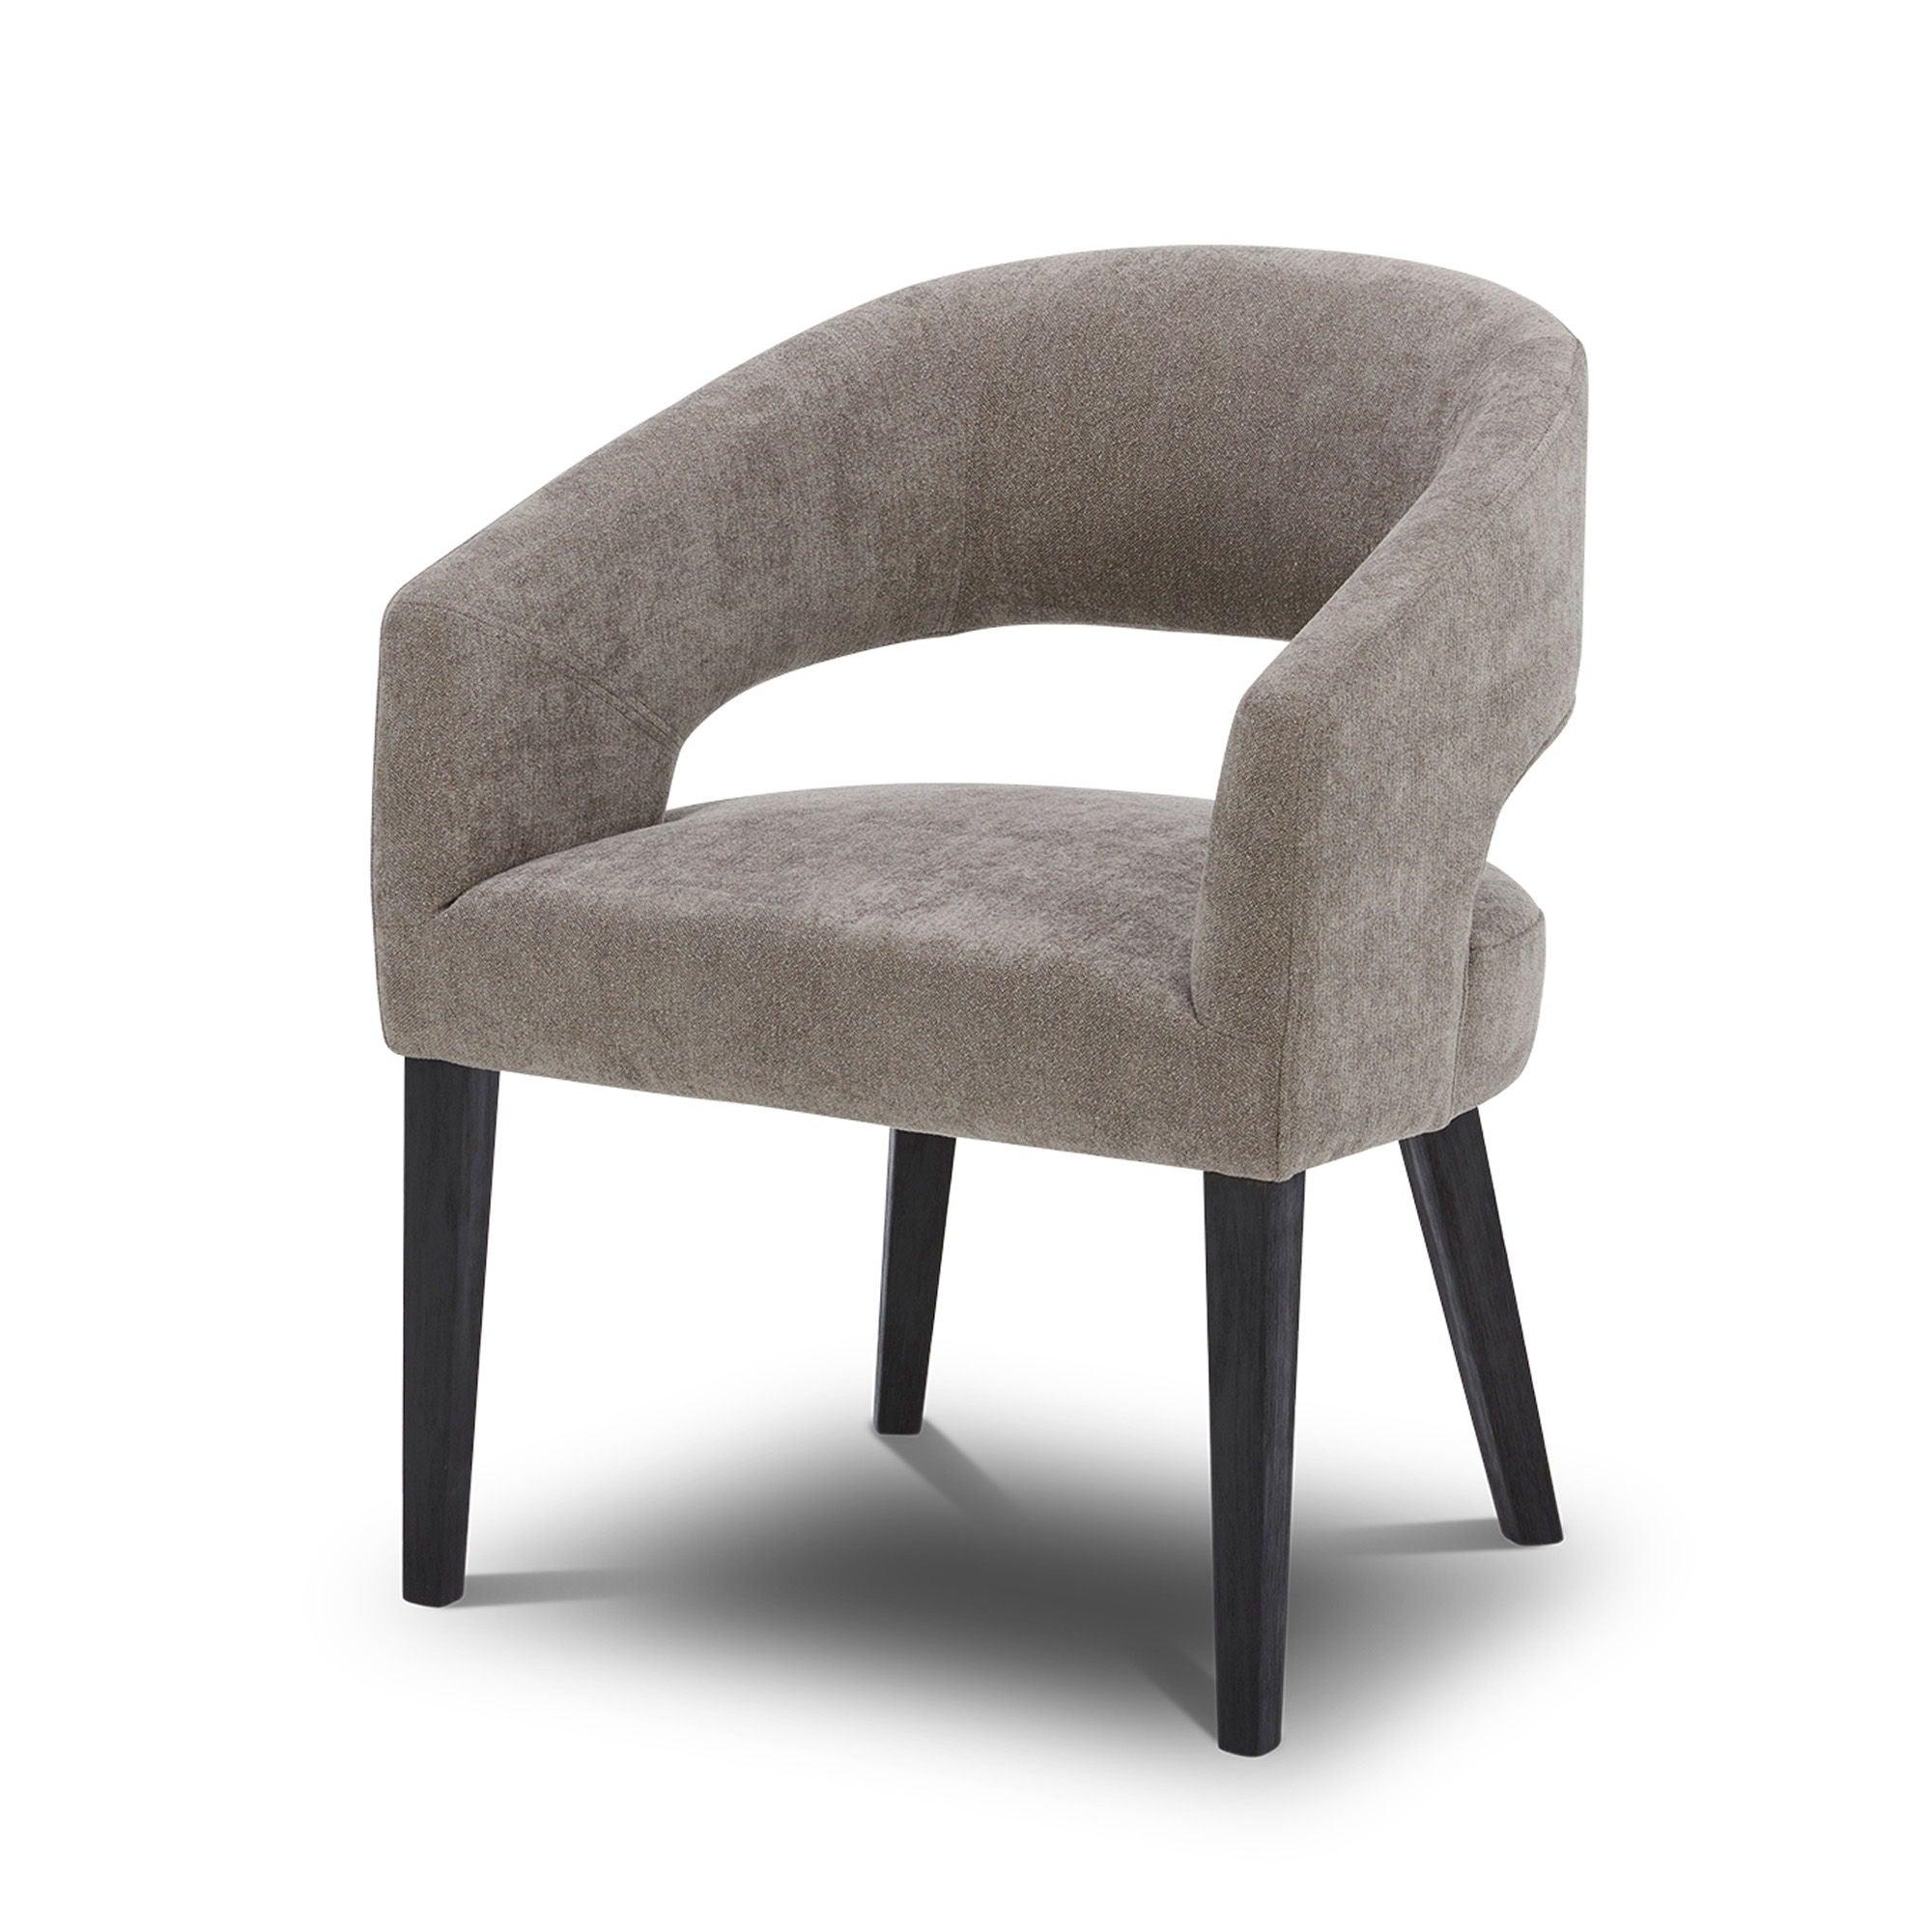 Parker House - Pure Modern Dining - Barrel Chair - Moonstone - 5th Avenue Furniture